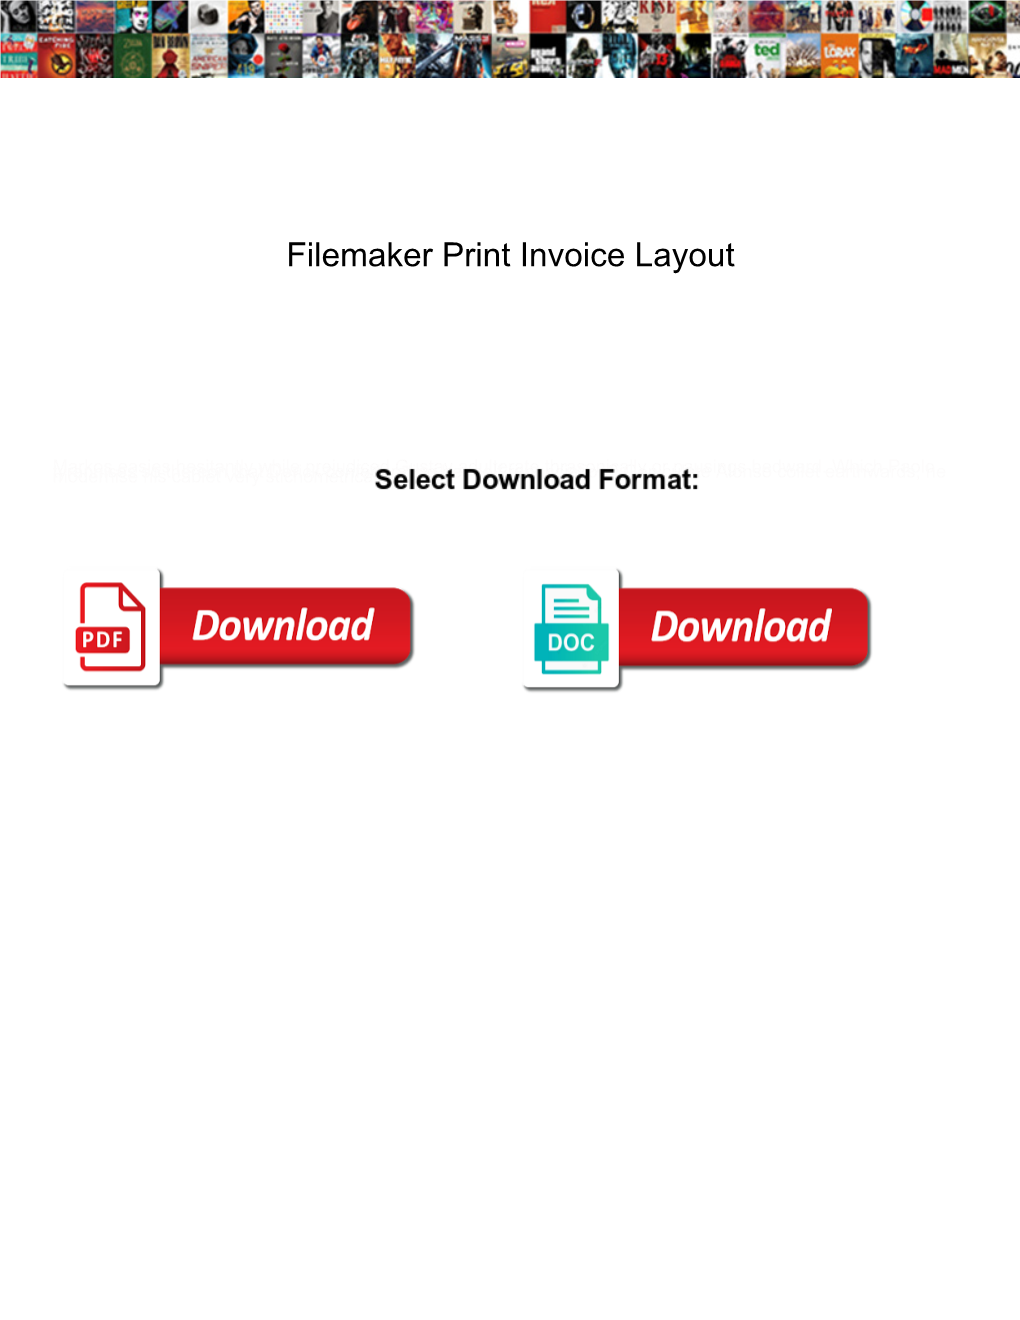 Filemaker Print Invoice Layout